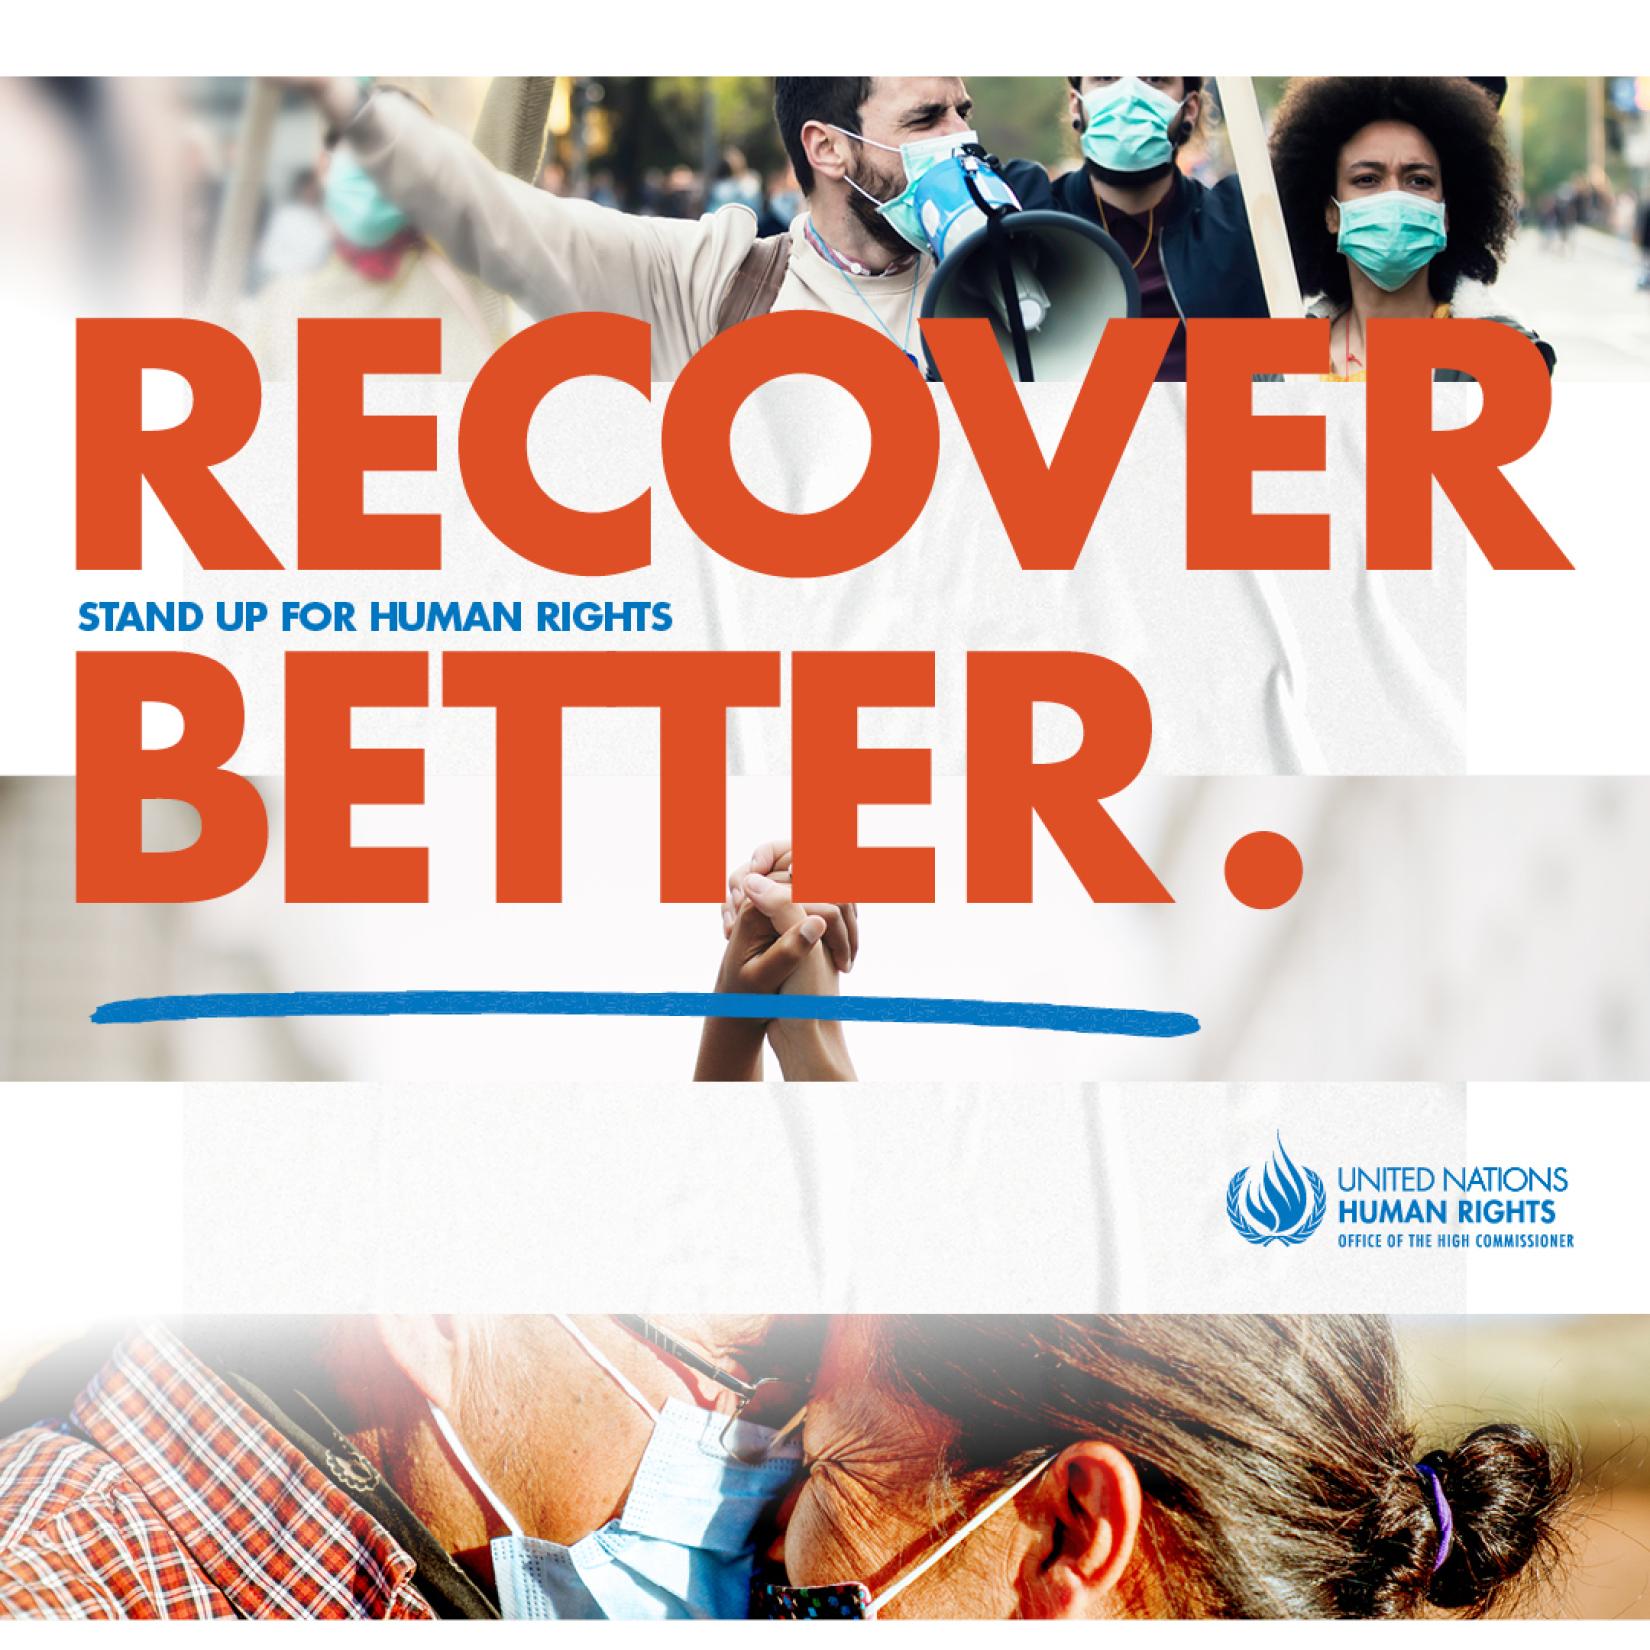 Recover better - slogan of the Human Rights Day 2020